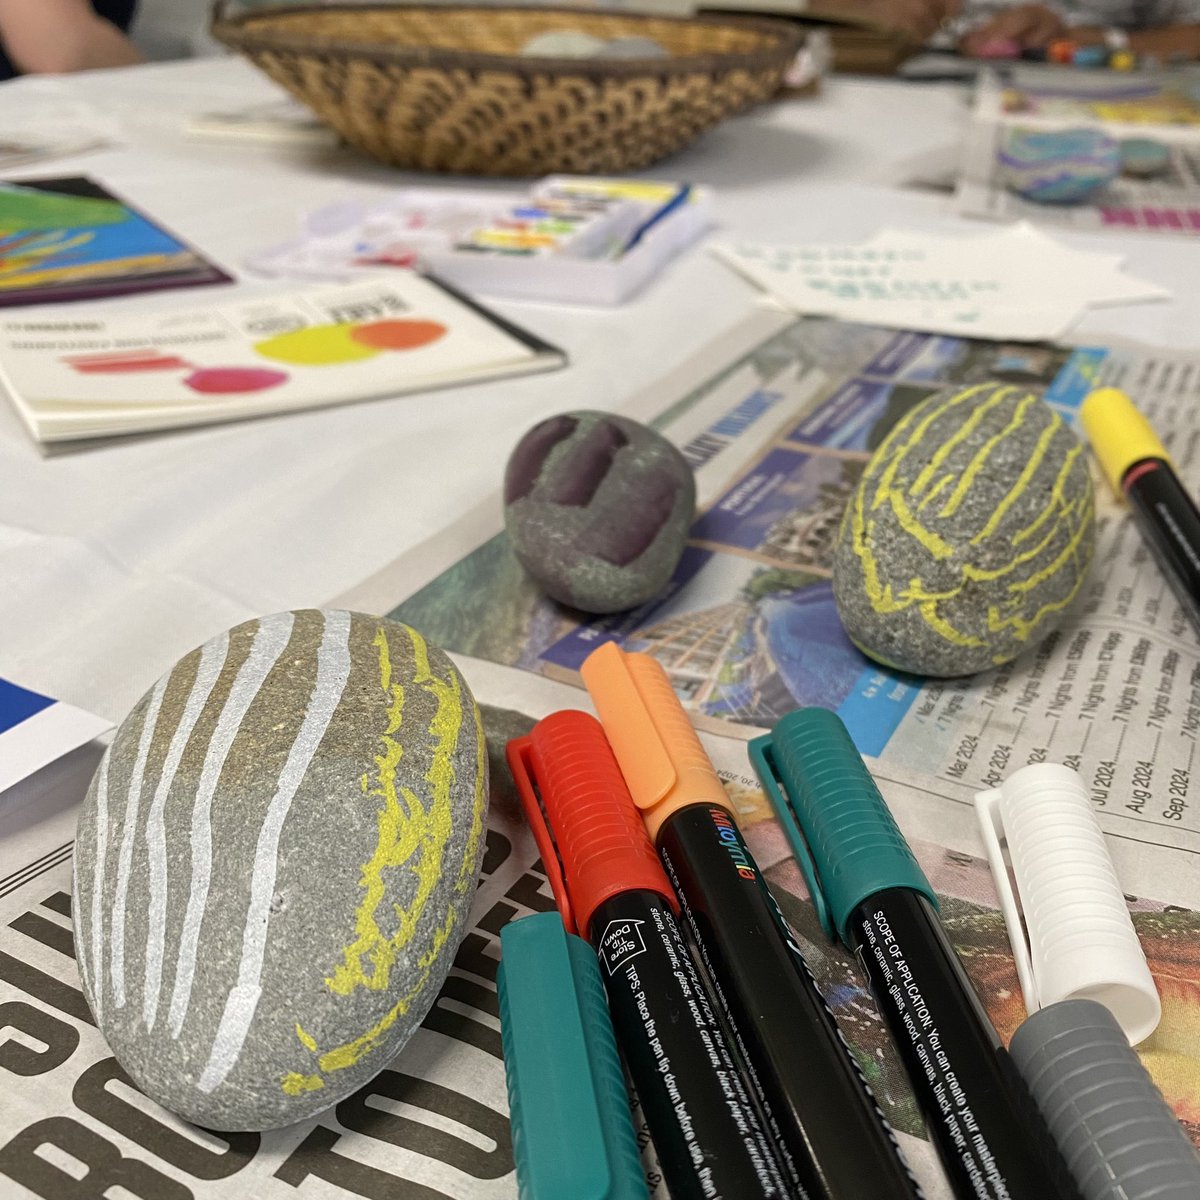 Birmingham and Sandwell Different Strokes Charity workshop at Sandwell Hospital. Creativity and connection. 

@diffstrokes #stroke #strokes #Birmingham #sandwell #creativity #painting #drawing #connecting #art #artist #artworkshops #craft #connections #family #friendsandfamily